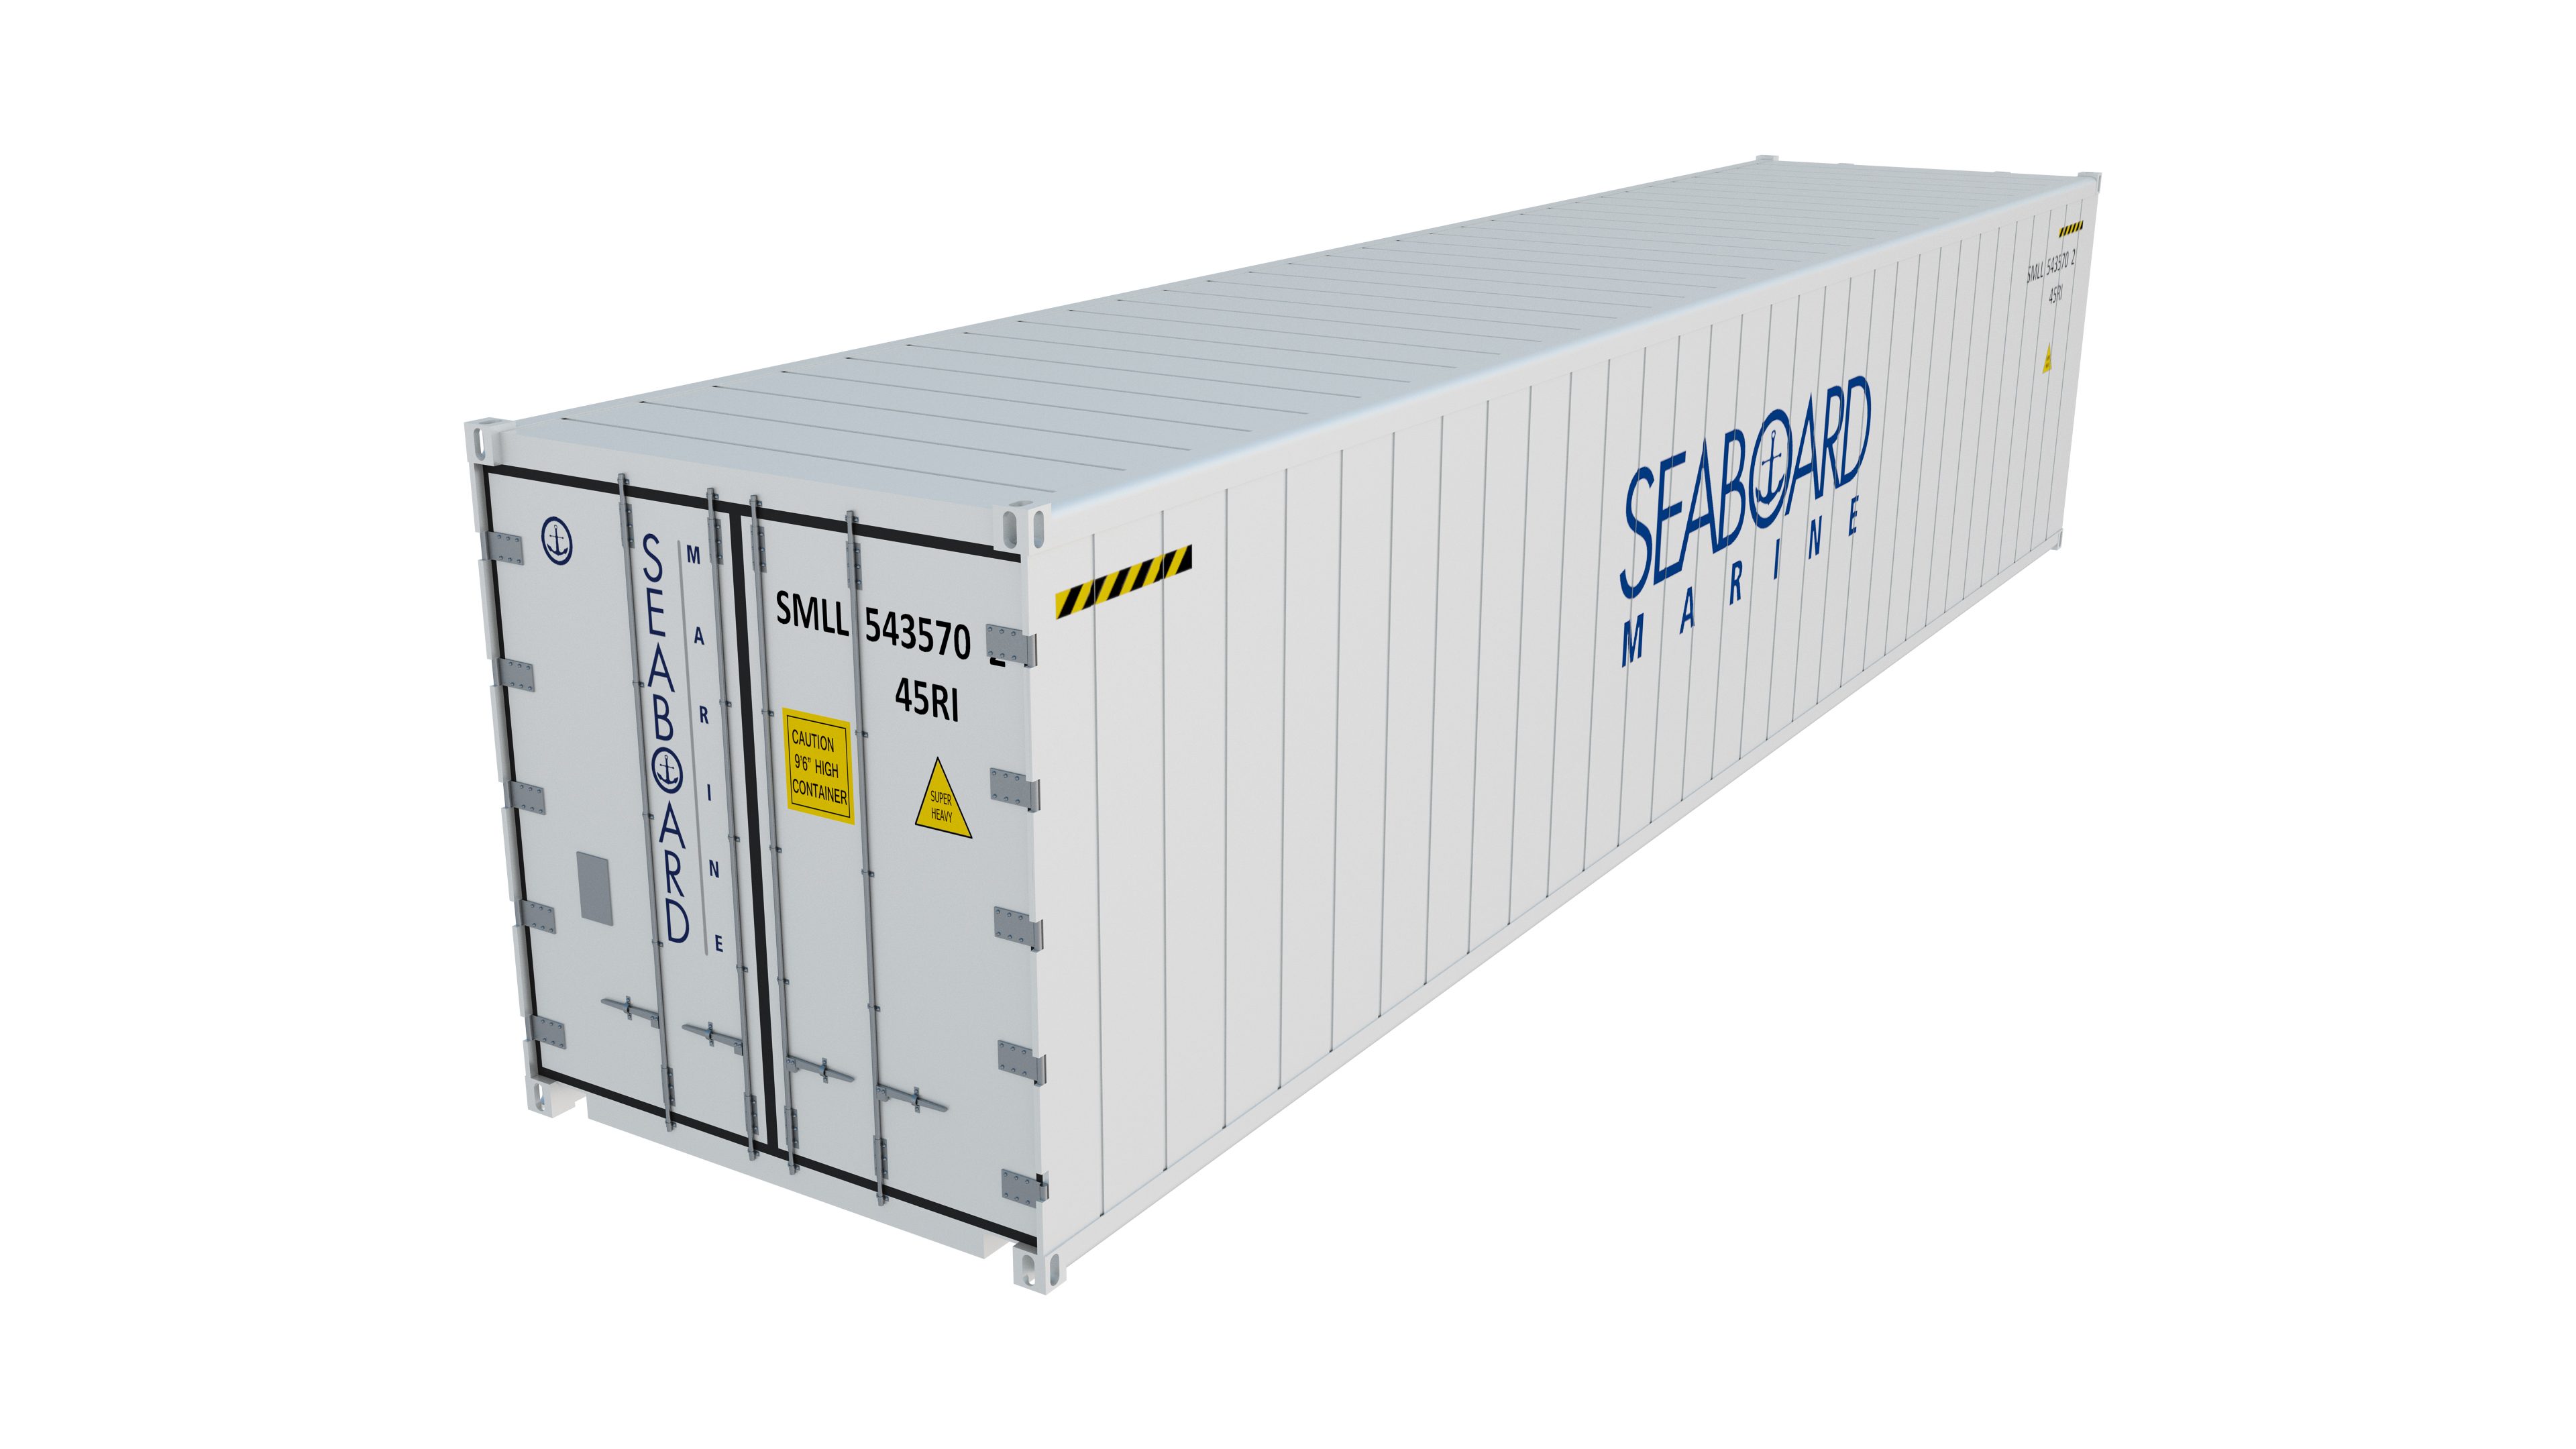 40-foot-refrigerated-container-back-seaboard-marine